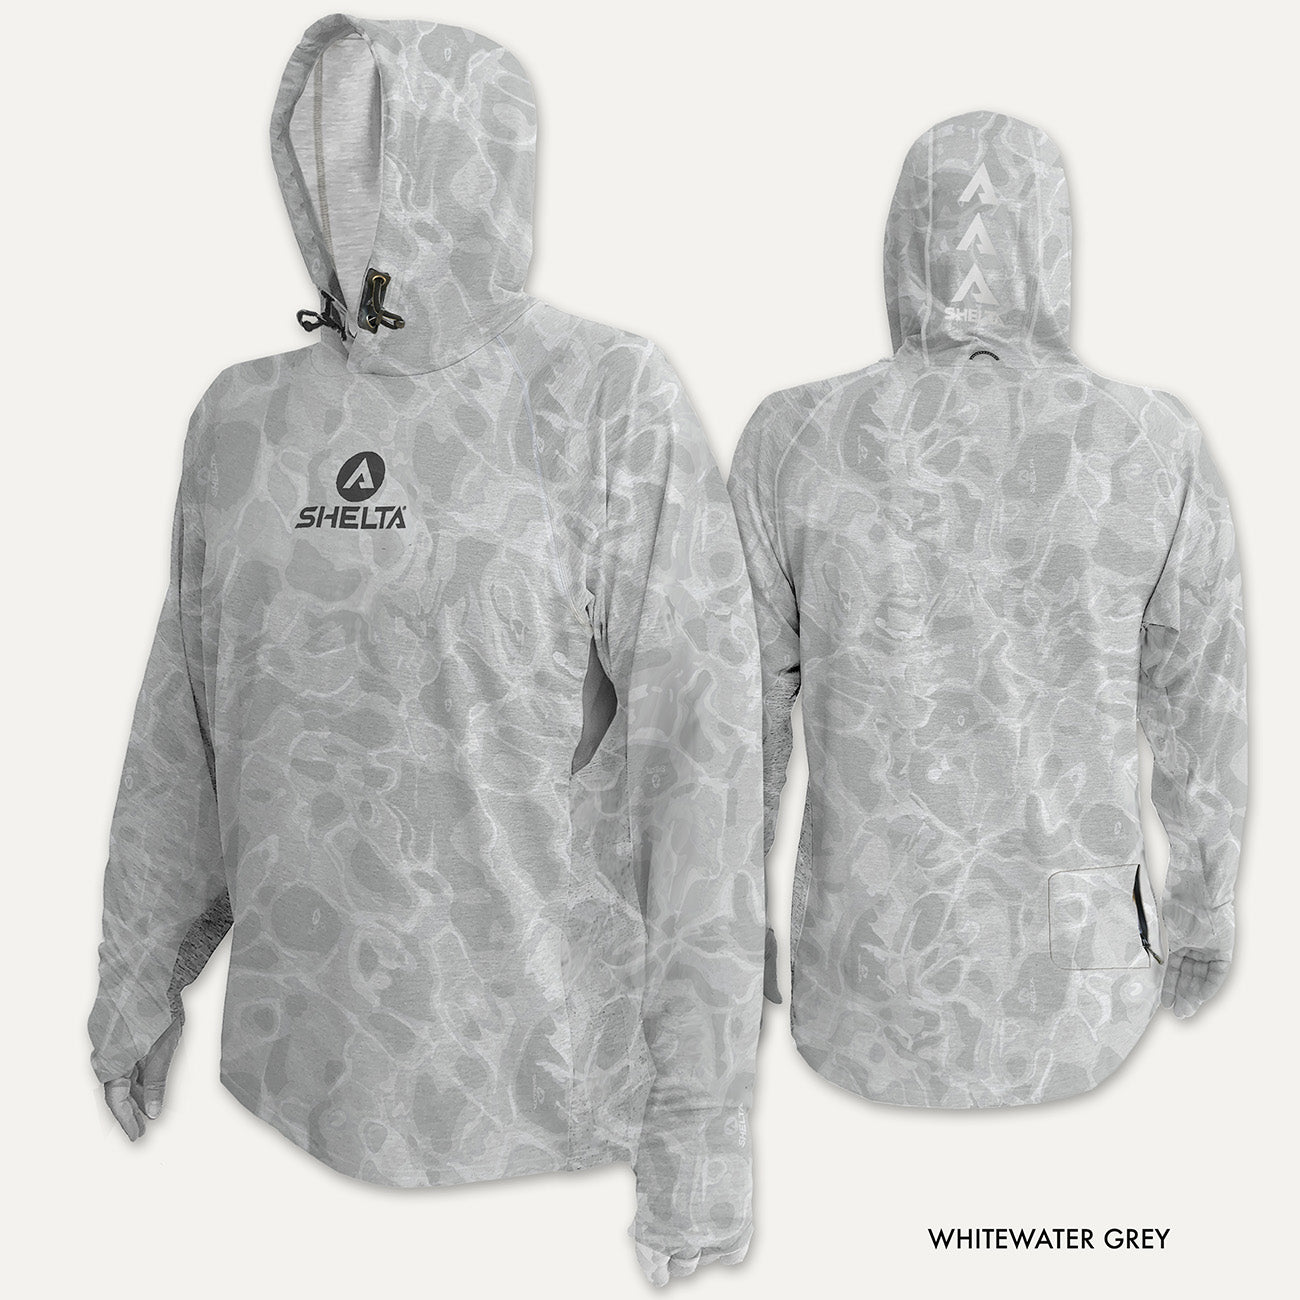 The Assault Hoodie in White Water is engineered & built with sun protection, function, and durability in mind. Offering features consistent with Shelta core values and innovation goals. UPF 50+ UV protection, the highest rating given. Blocks 98% of UVA/UVB radiation Loose comfort fit Moisture Wicking Sleeves with thumb hole & finger loop for multiple hand protection options